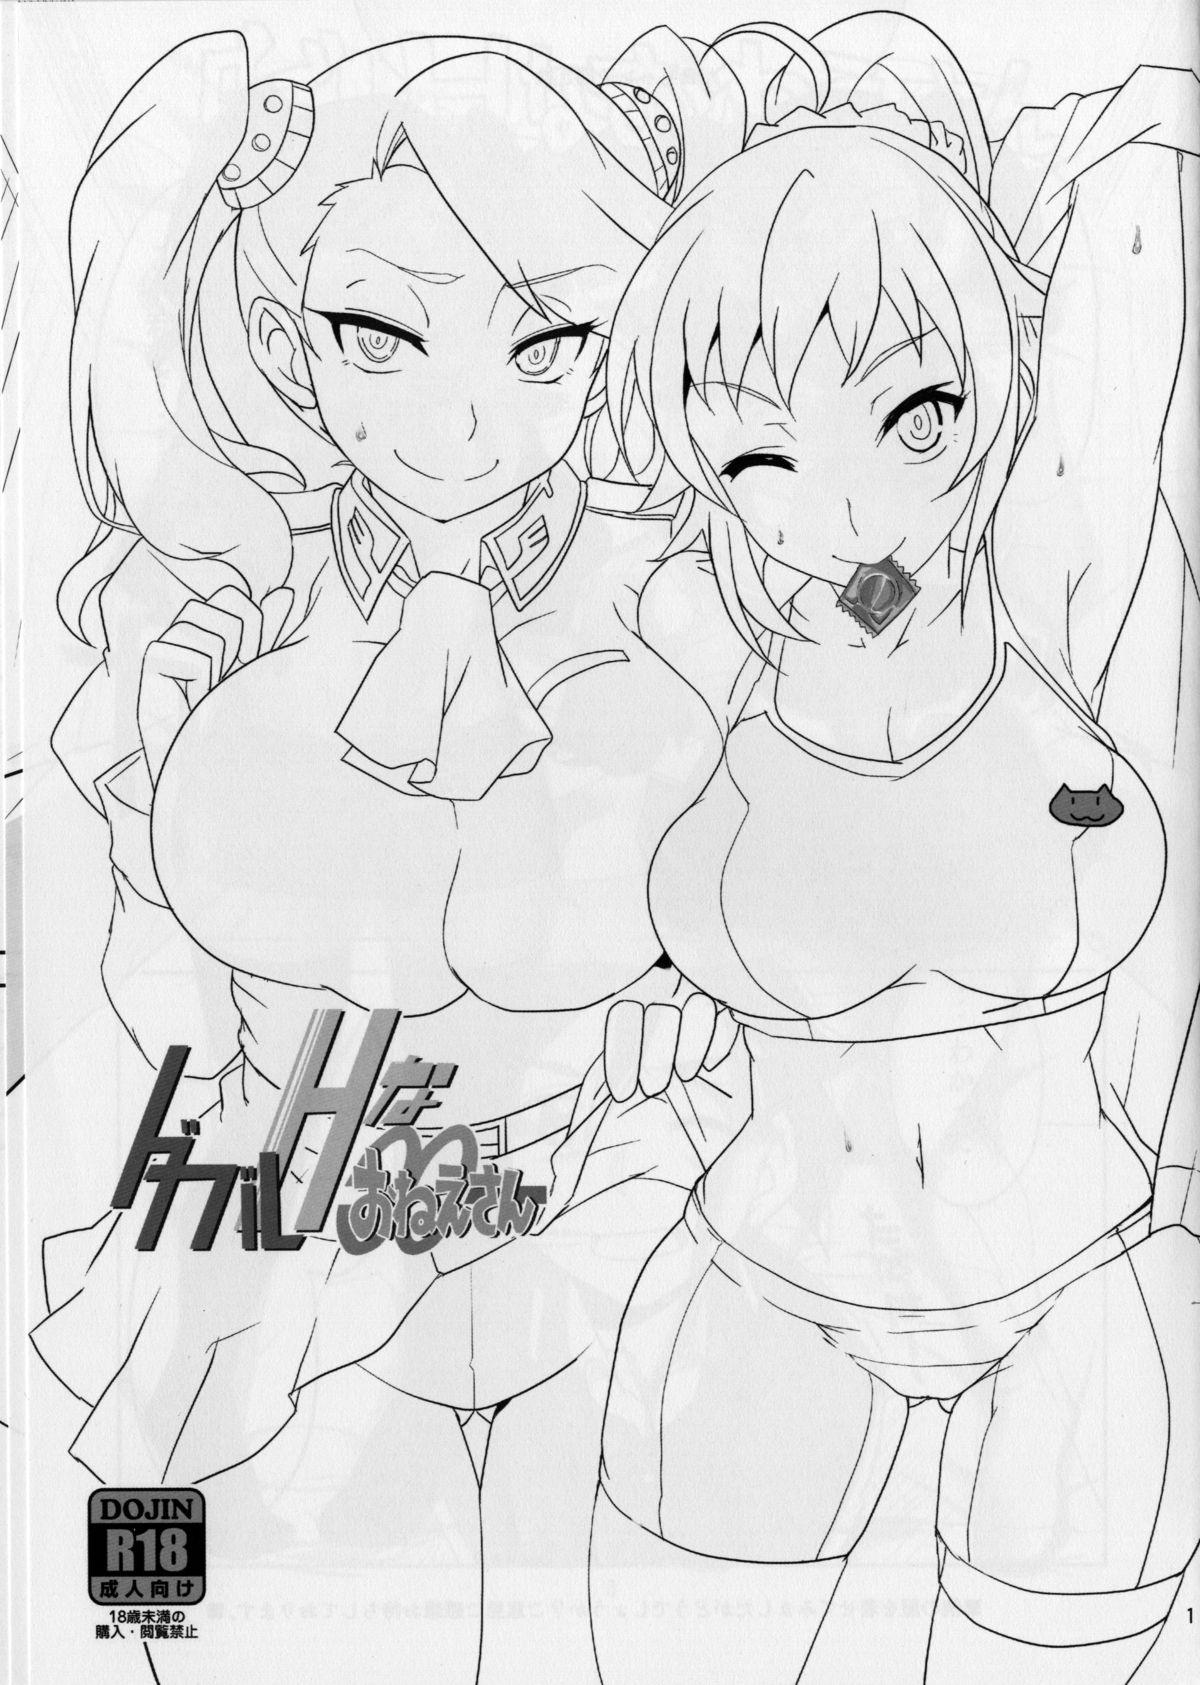 New Double H na Onee-san - Gundam build fighters try Head - Page 3